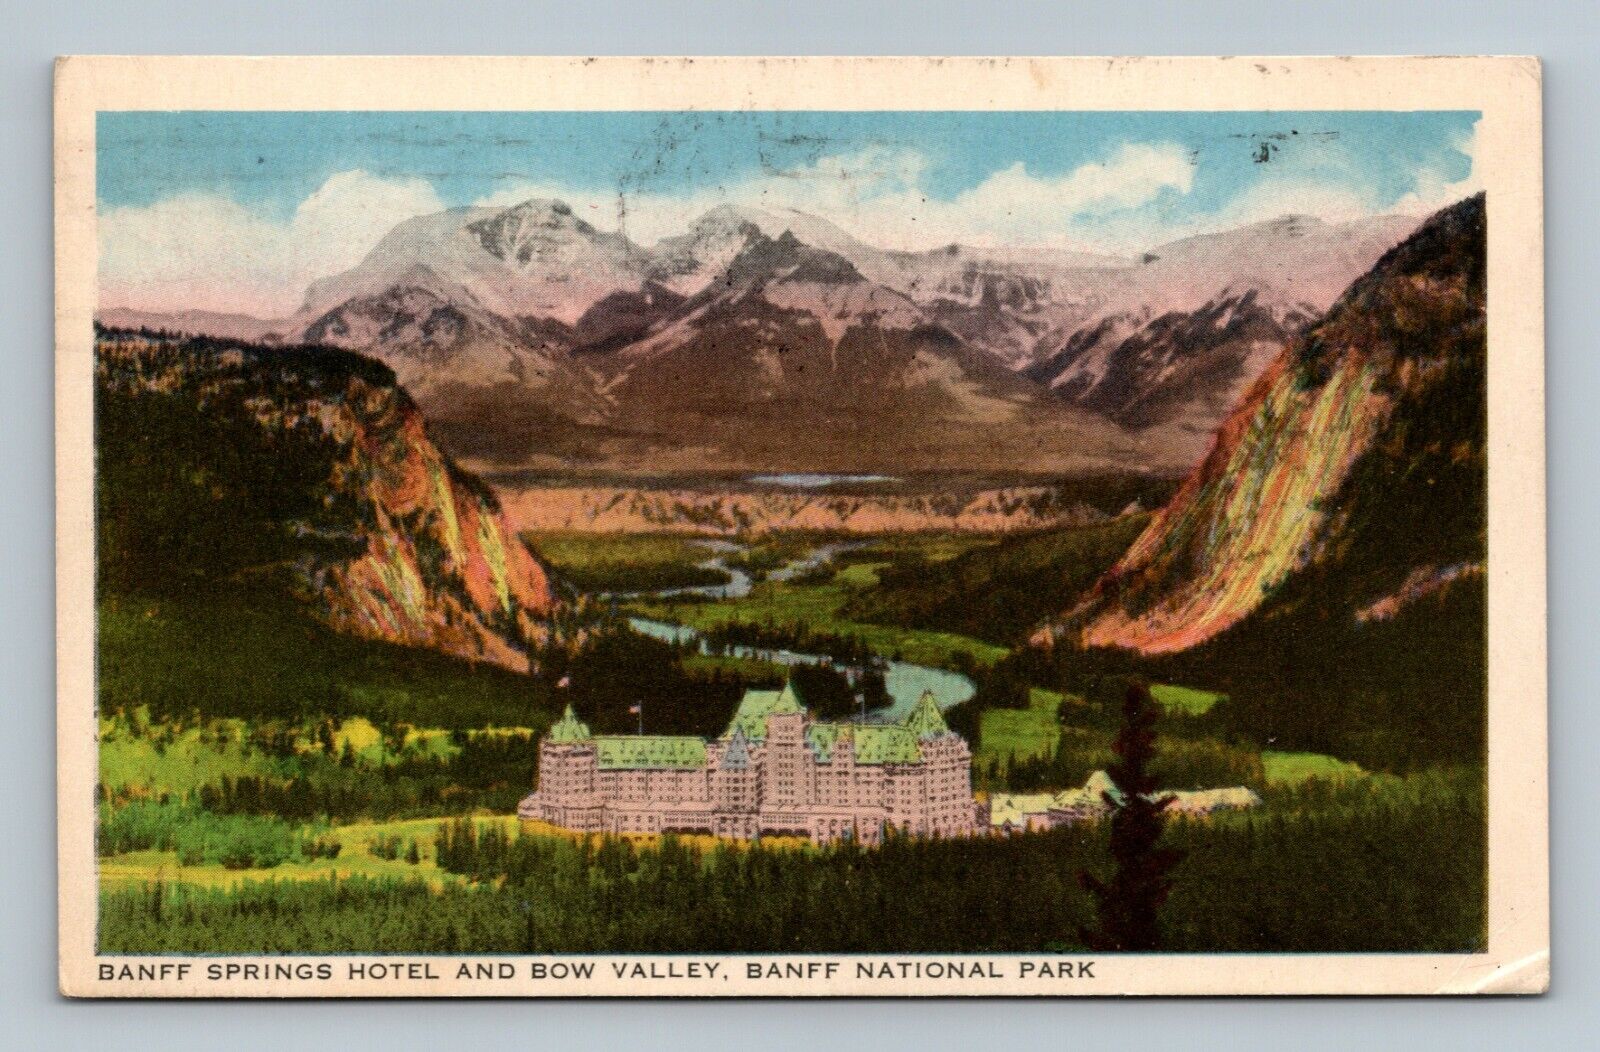 Banff Springs Hotel and Bow Valley Banff National Park Postcard